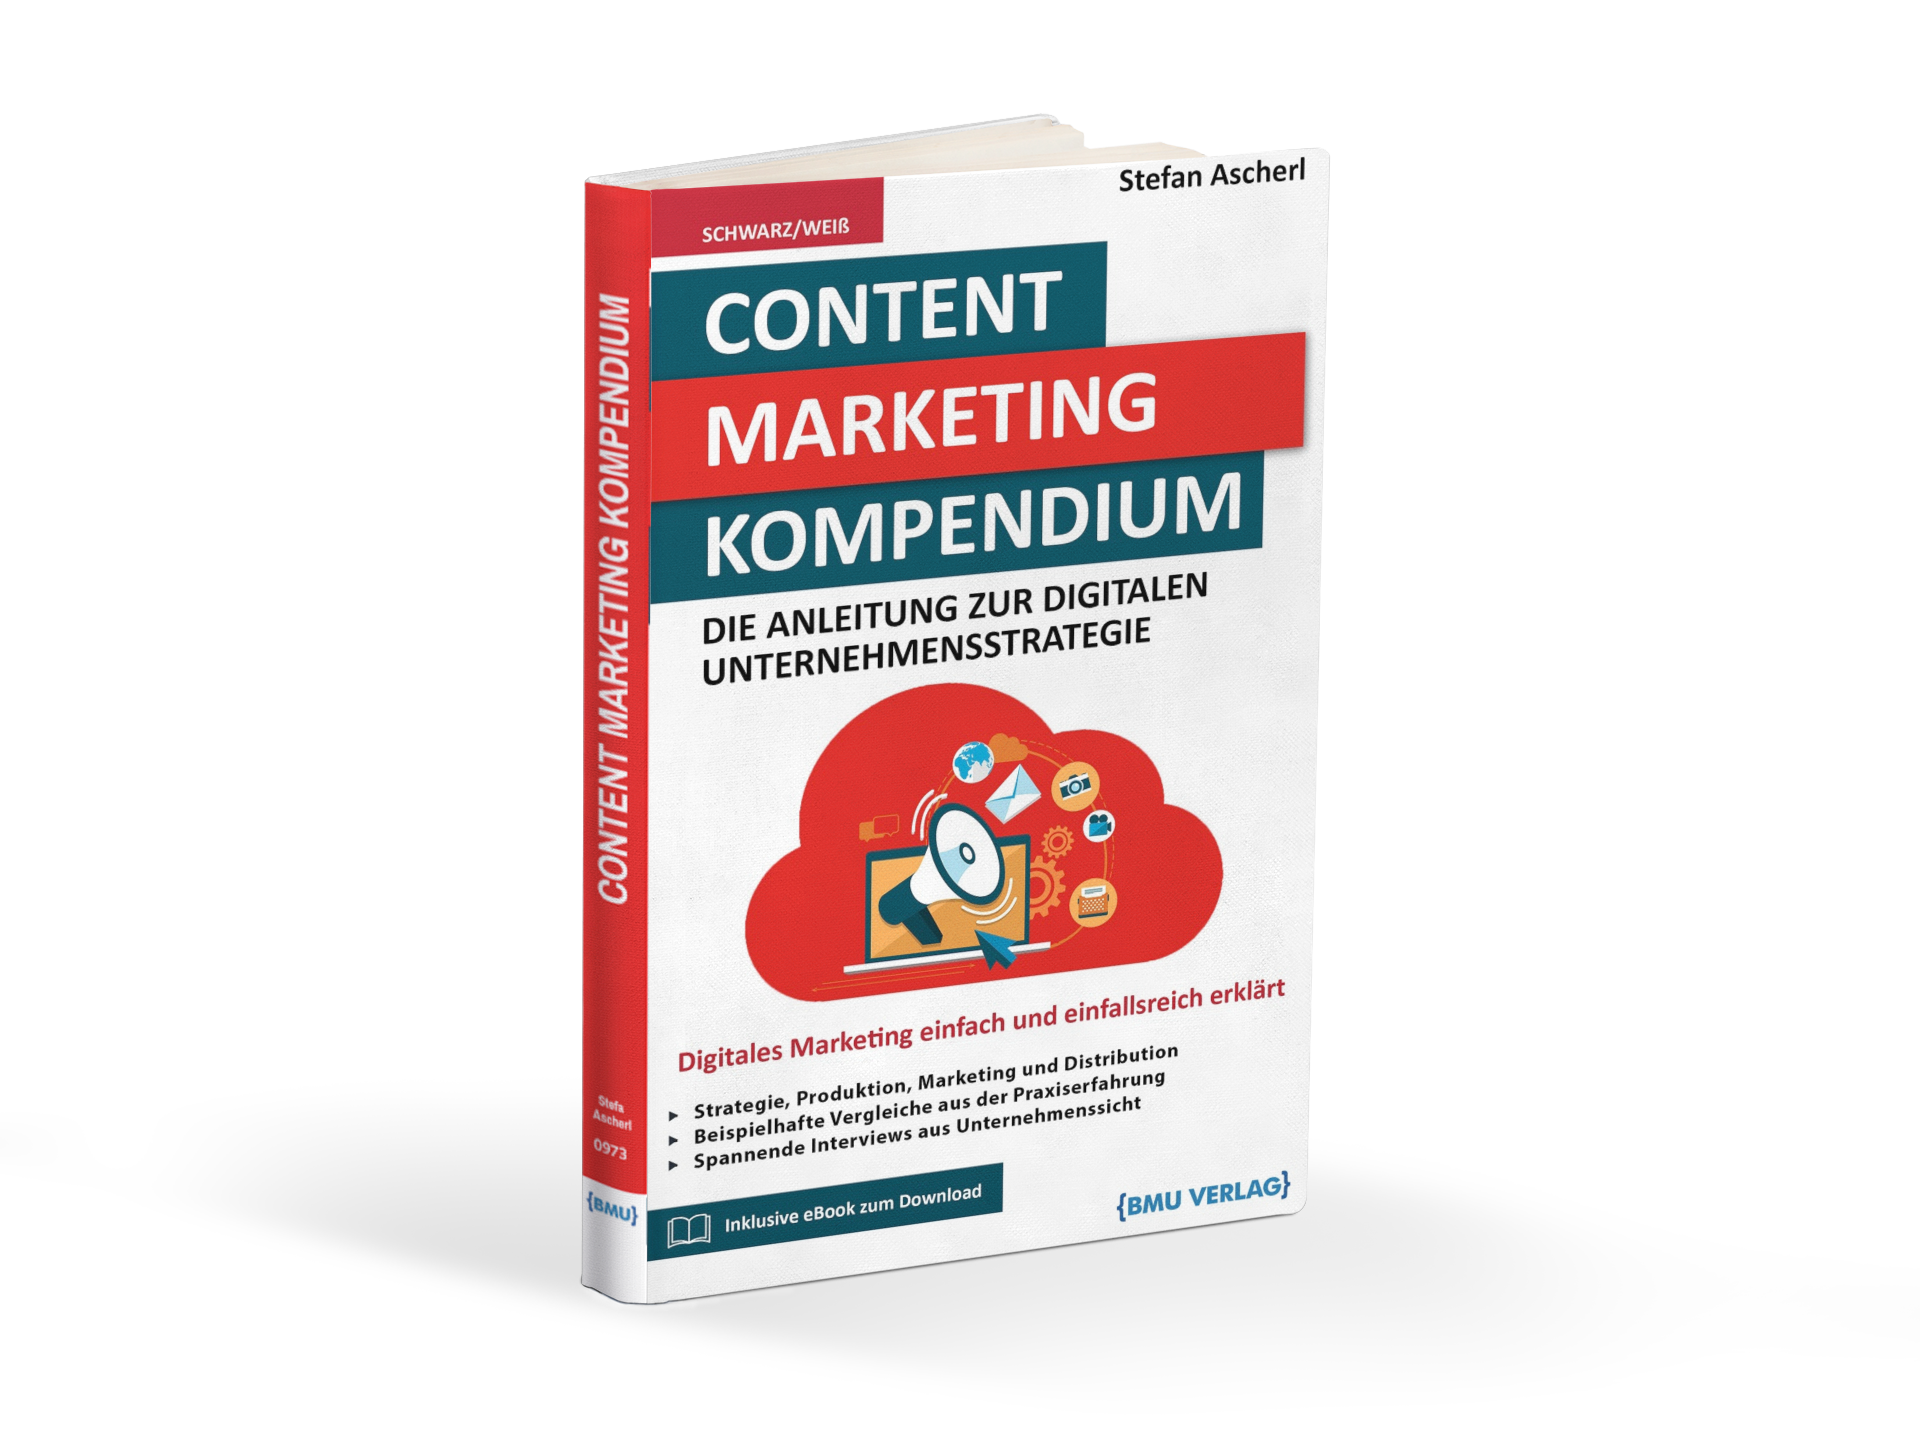 Content Marketing Compendium: The instructions for the digital corporate strategy